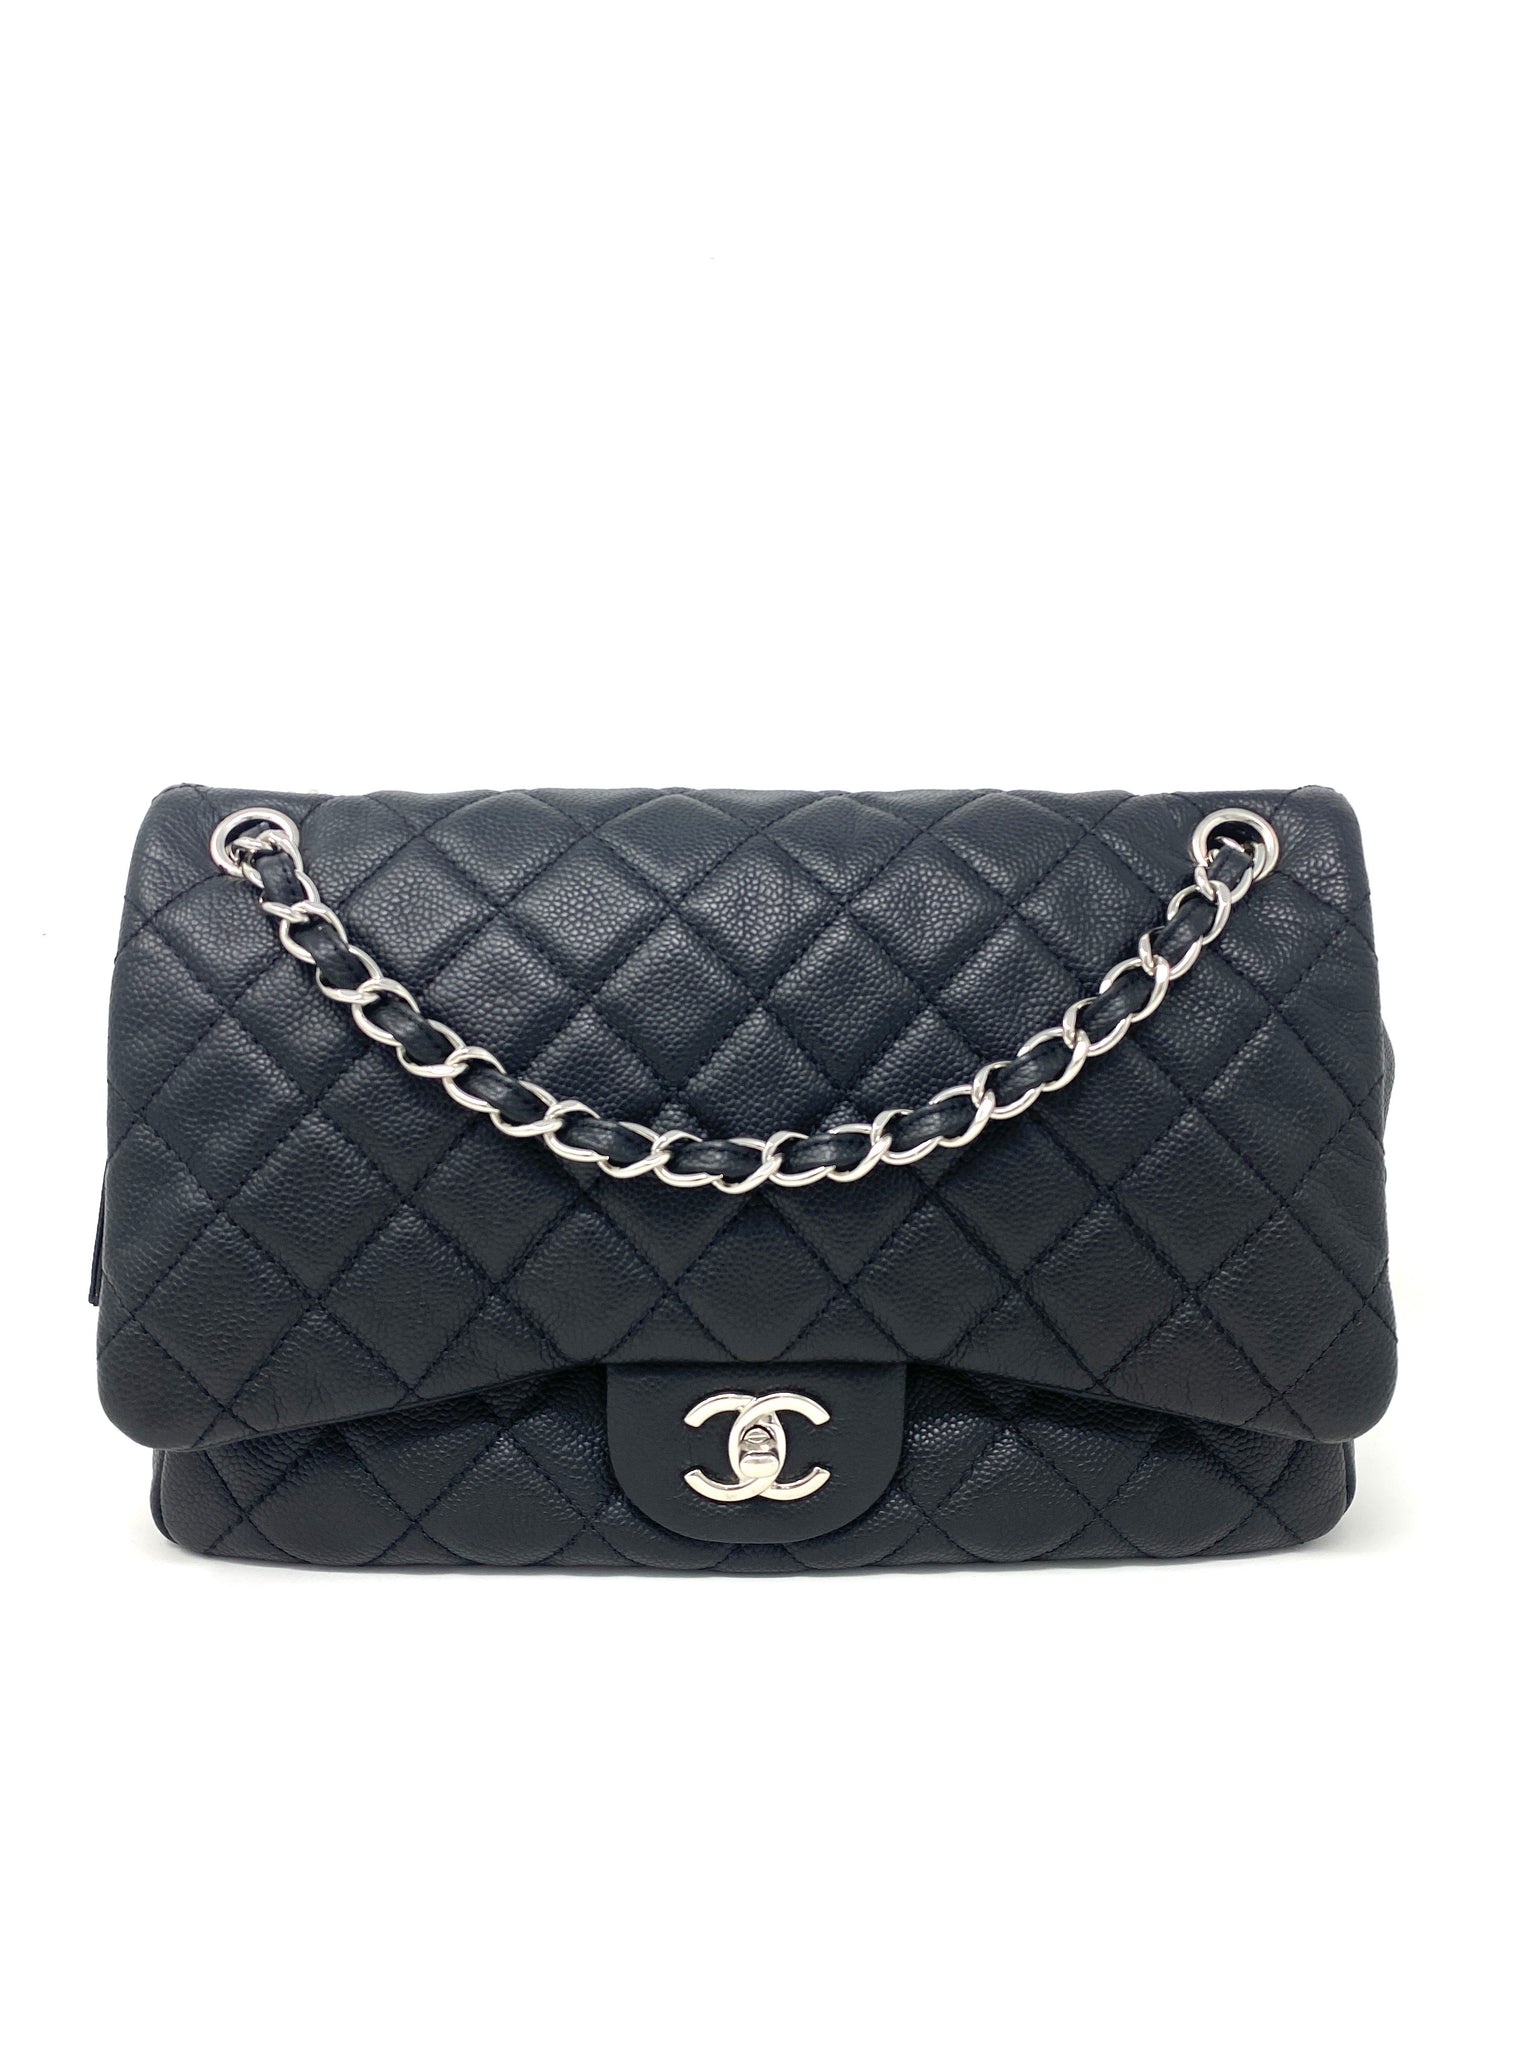 AUTHENTIC CHANEL Ombre Caviar Large Quilted Ivory Gray Silver Chain Tote  Handbag